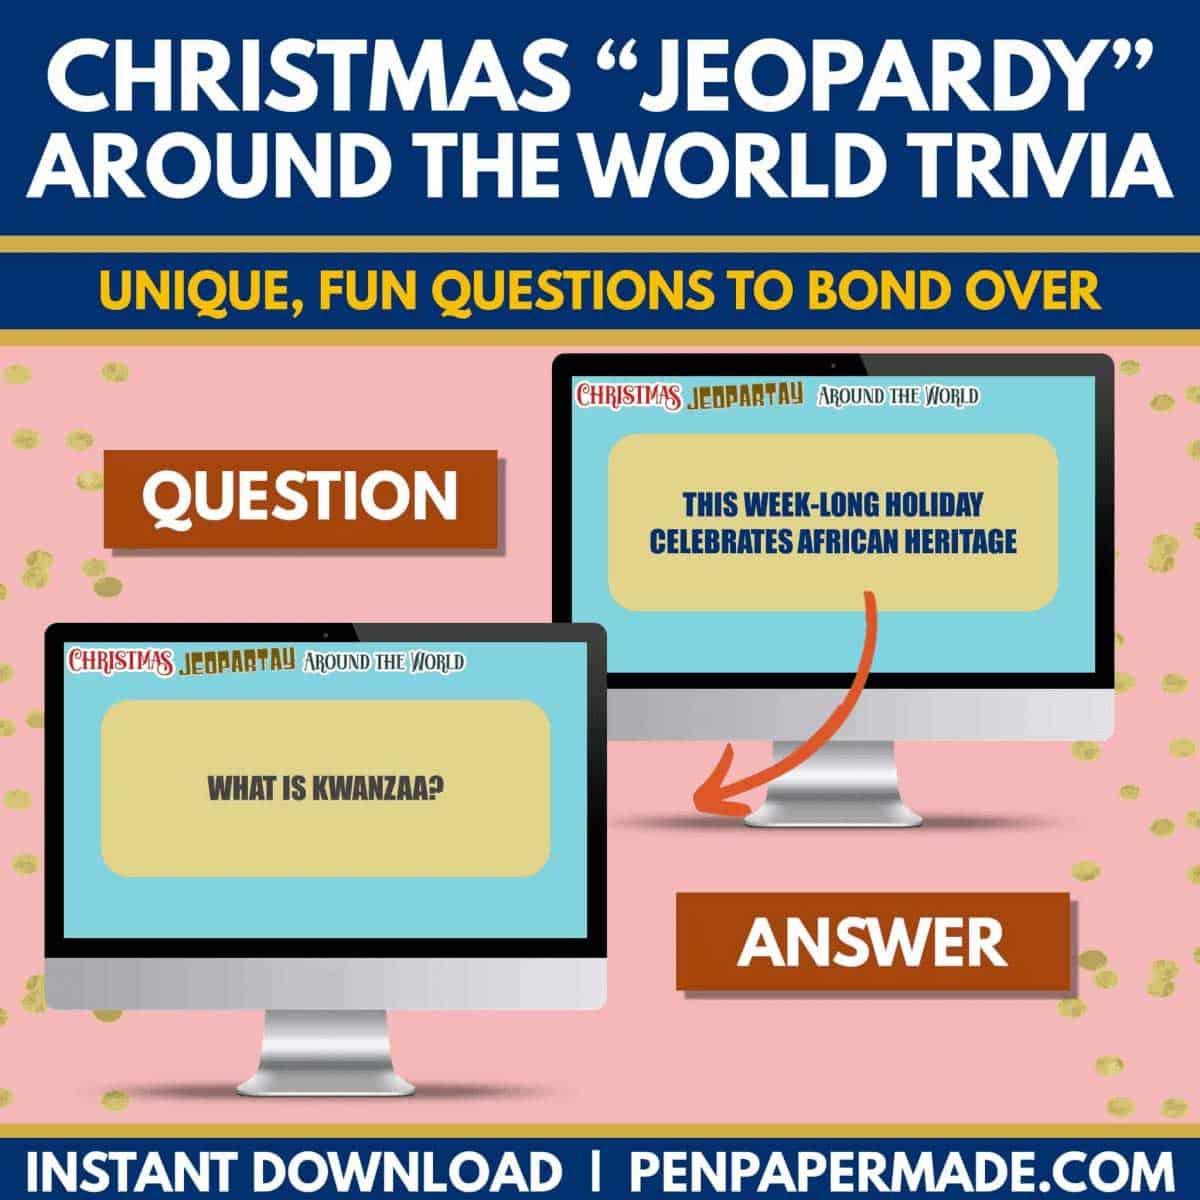 fun christmas around the world jeopardy questions like what is the week-long holiday that celebrates african heritage?